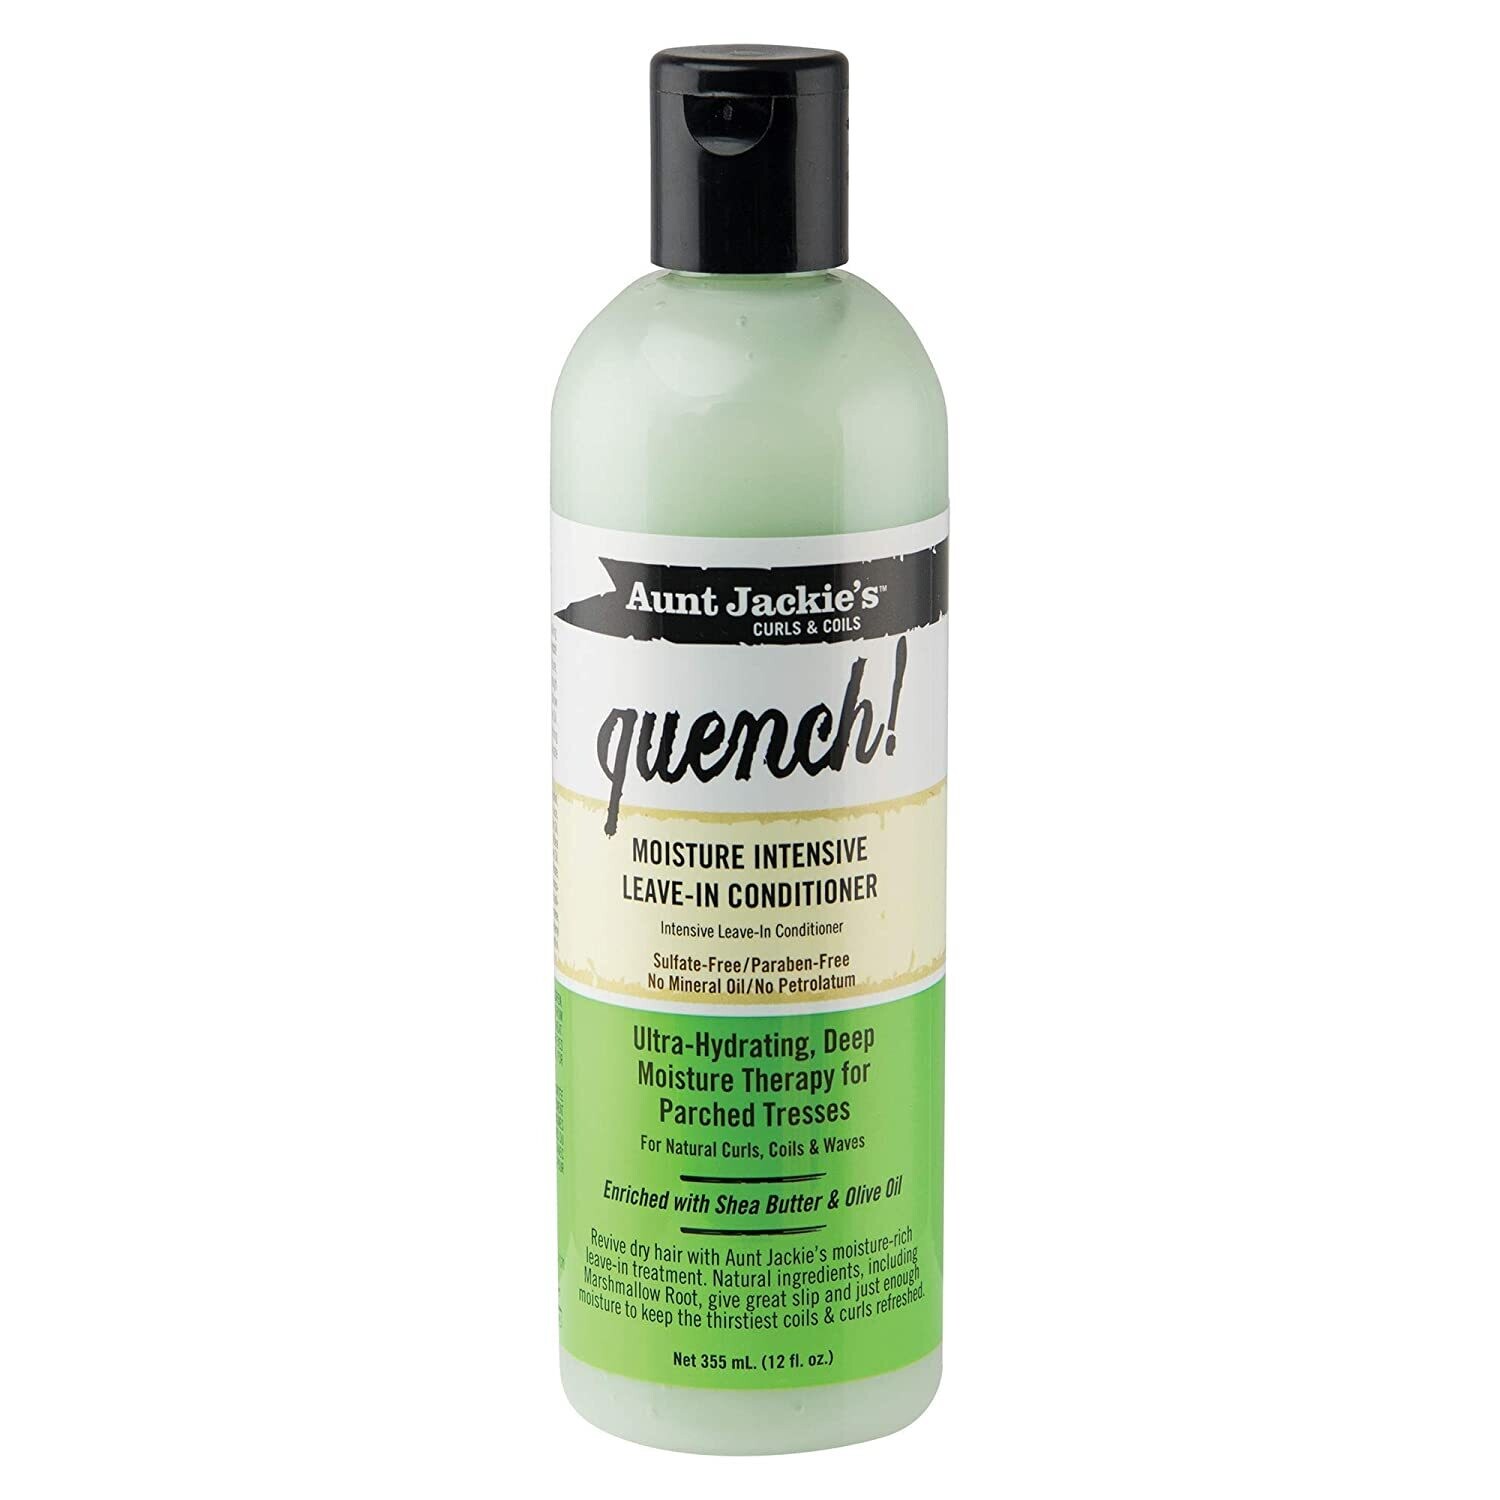 Aunt Jackie's Quench! Moisture Intensive Leave In Conditioner 12oz